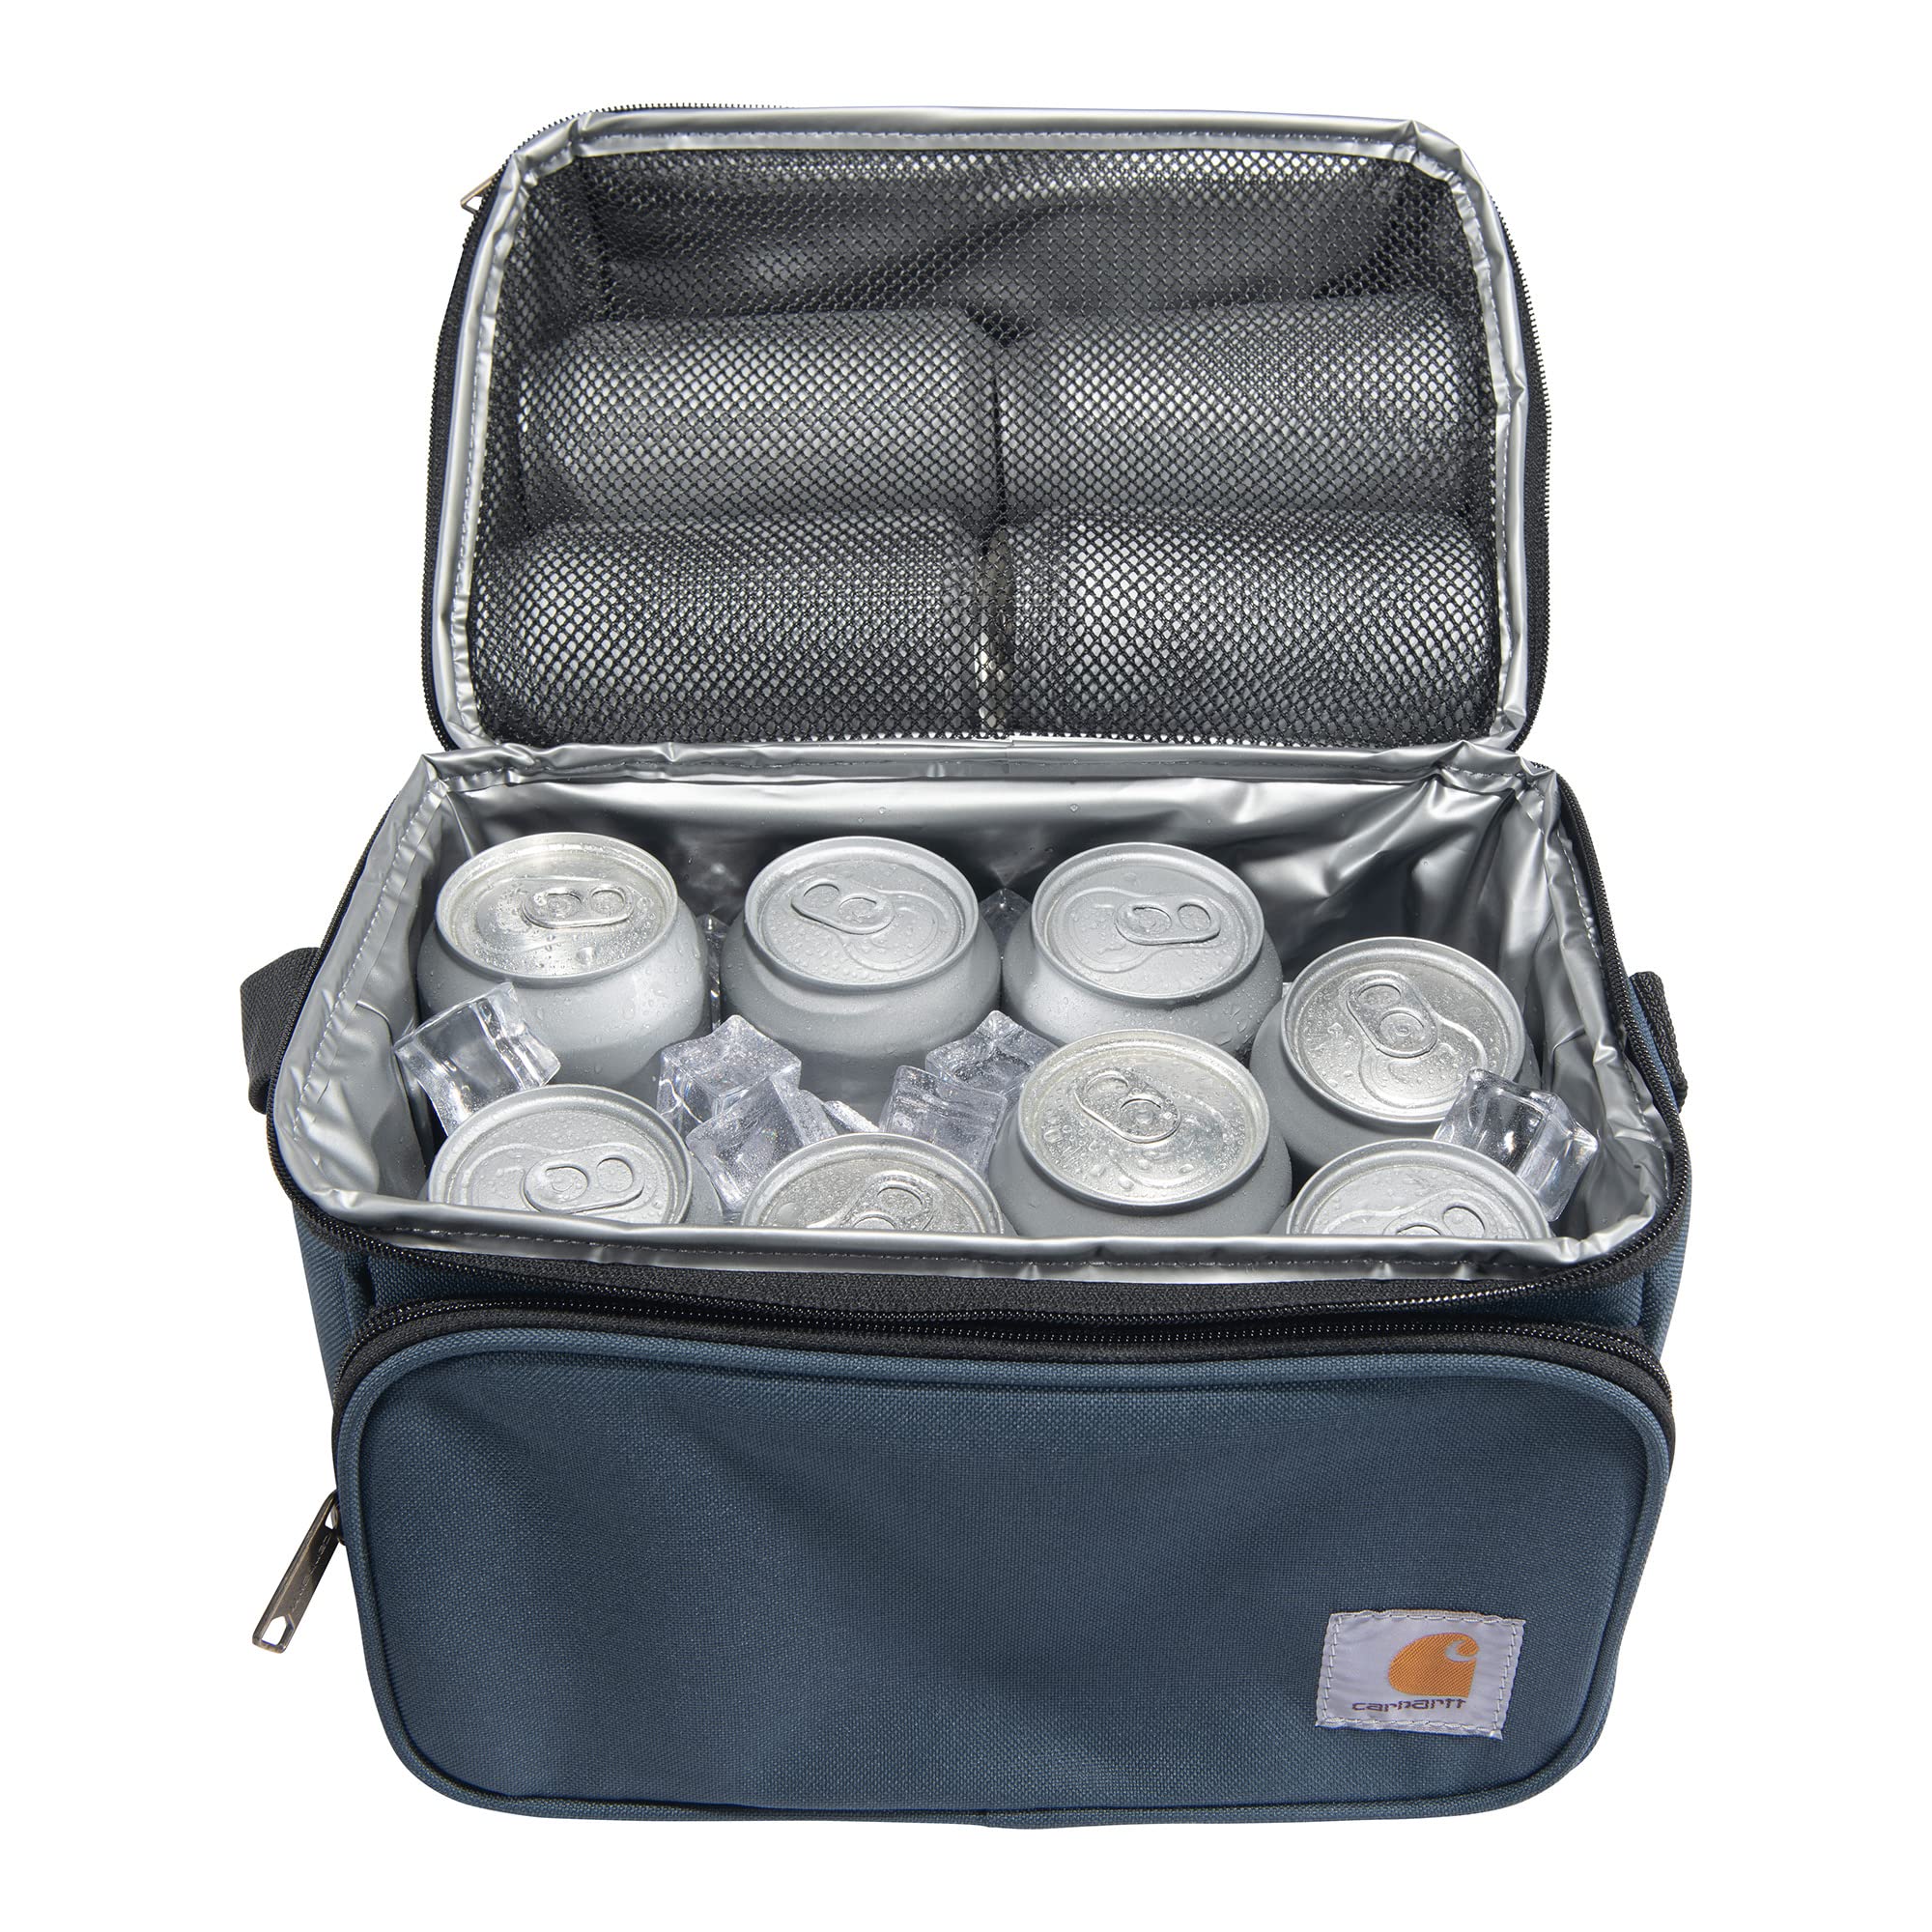 Carhartt Deluxe Dual Compartment Insulated Lunch Cooler Bag, Navy - image 5 of 7